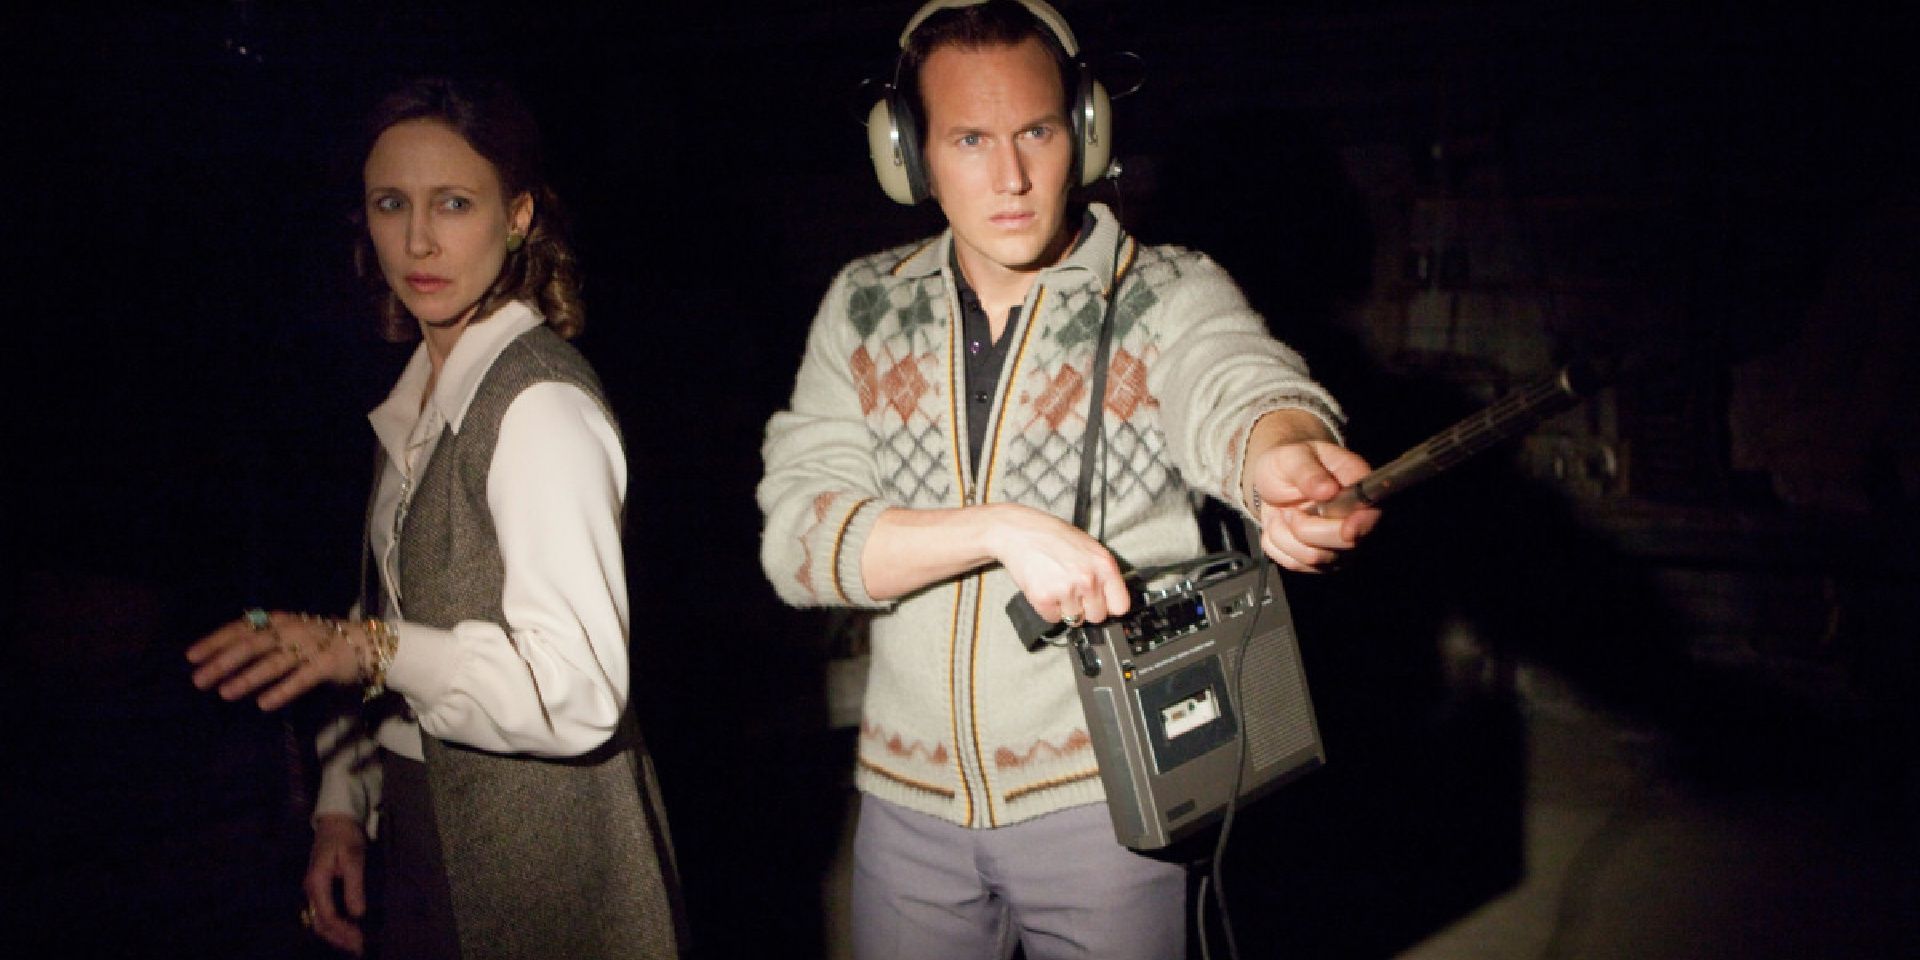 Ed and Lorraine Warren hunt spirits in the Conjuring franchise.